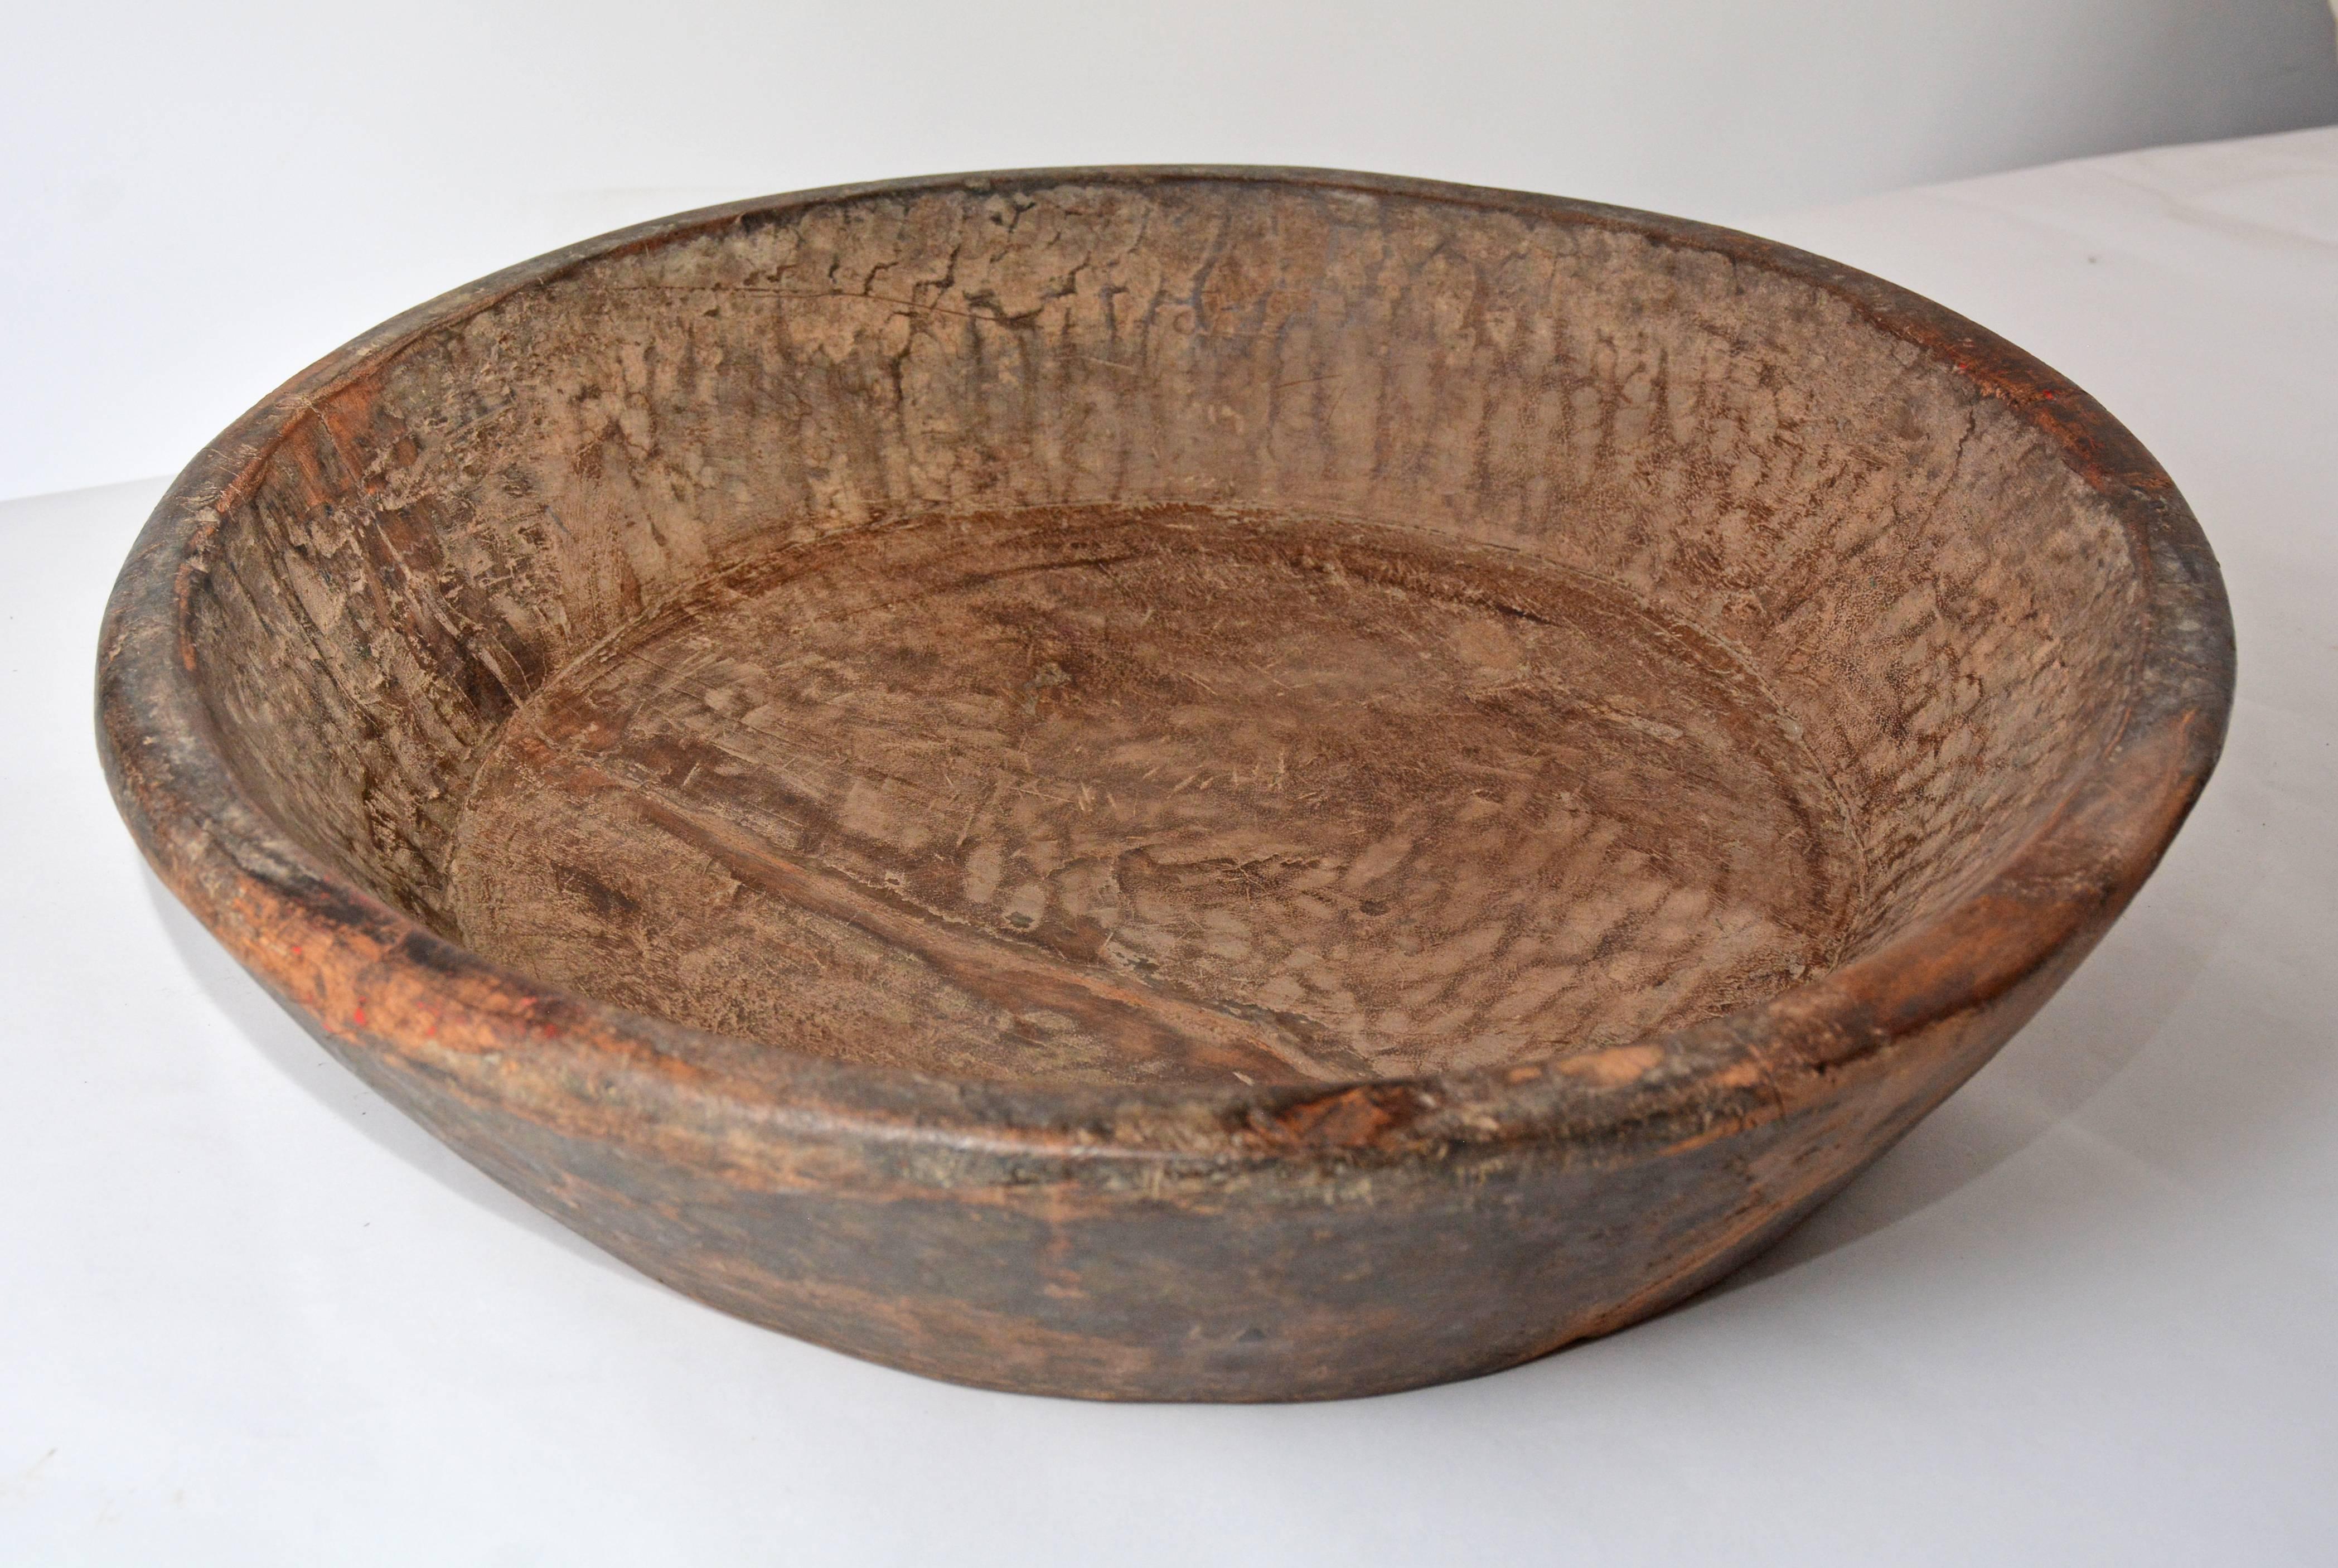 Made of a dense, heavy wood, the antique hand-carved bowl has a flat bottom and tapered sides. Chisel marks are readily seen.